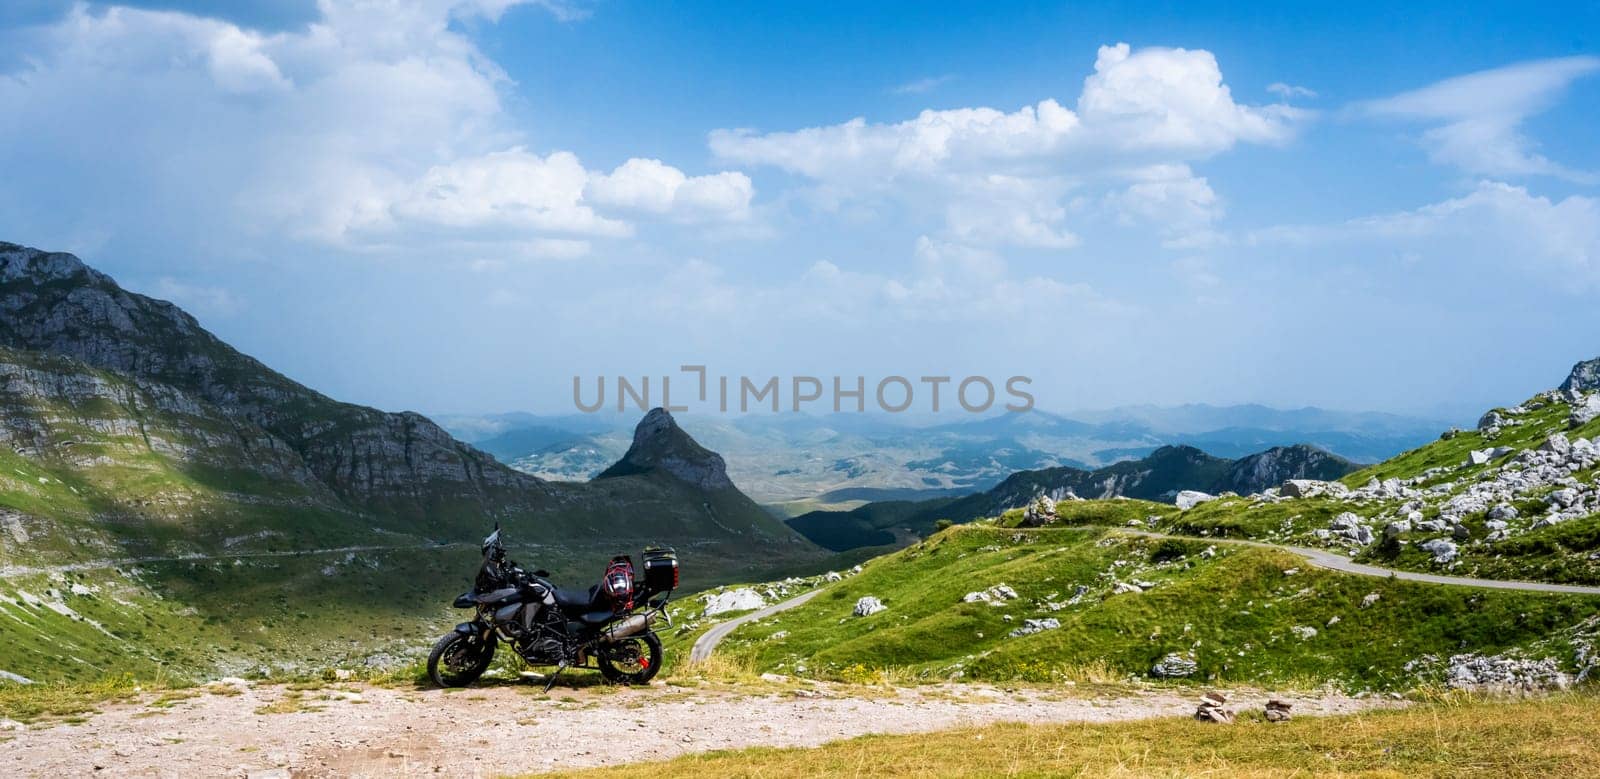 Motocycle standing in the mountain pick in National park Durmitor in Montenegro with amazing nature landscape view